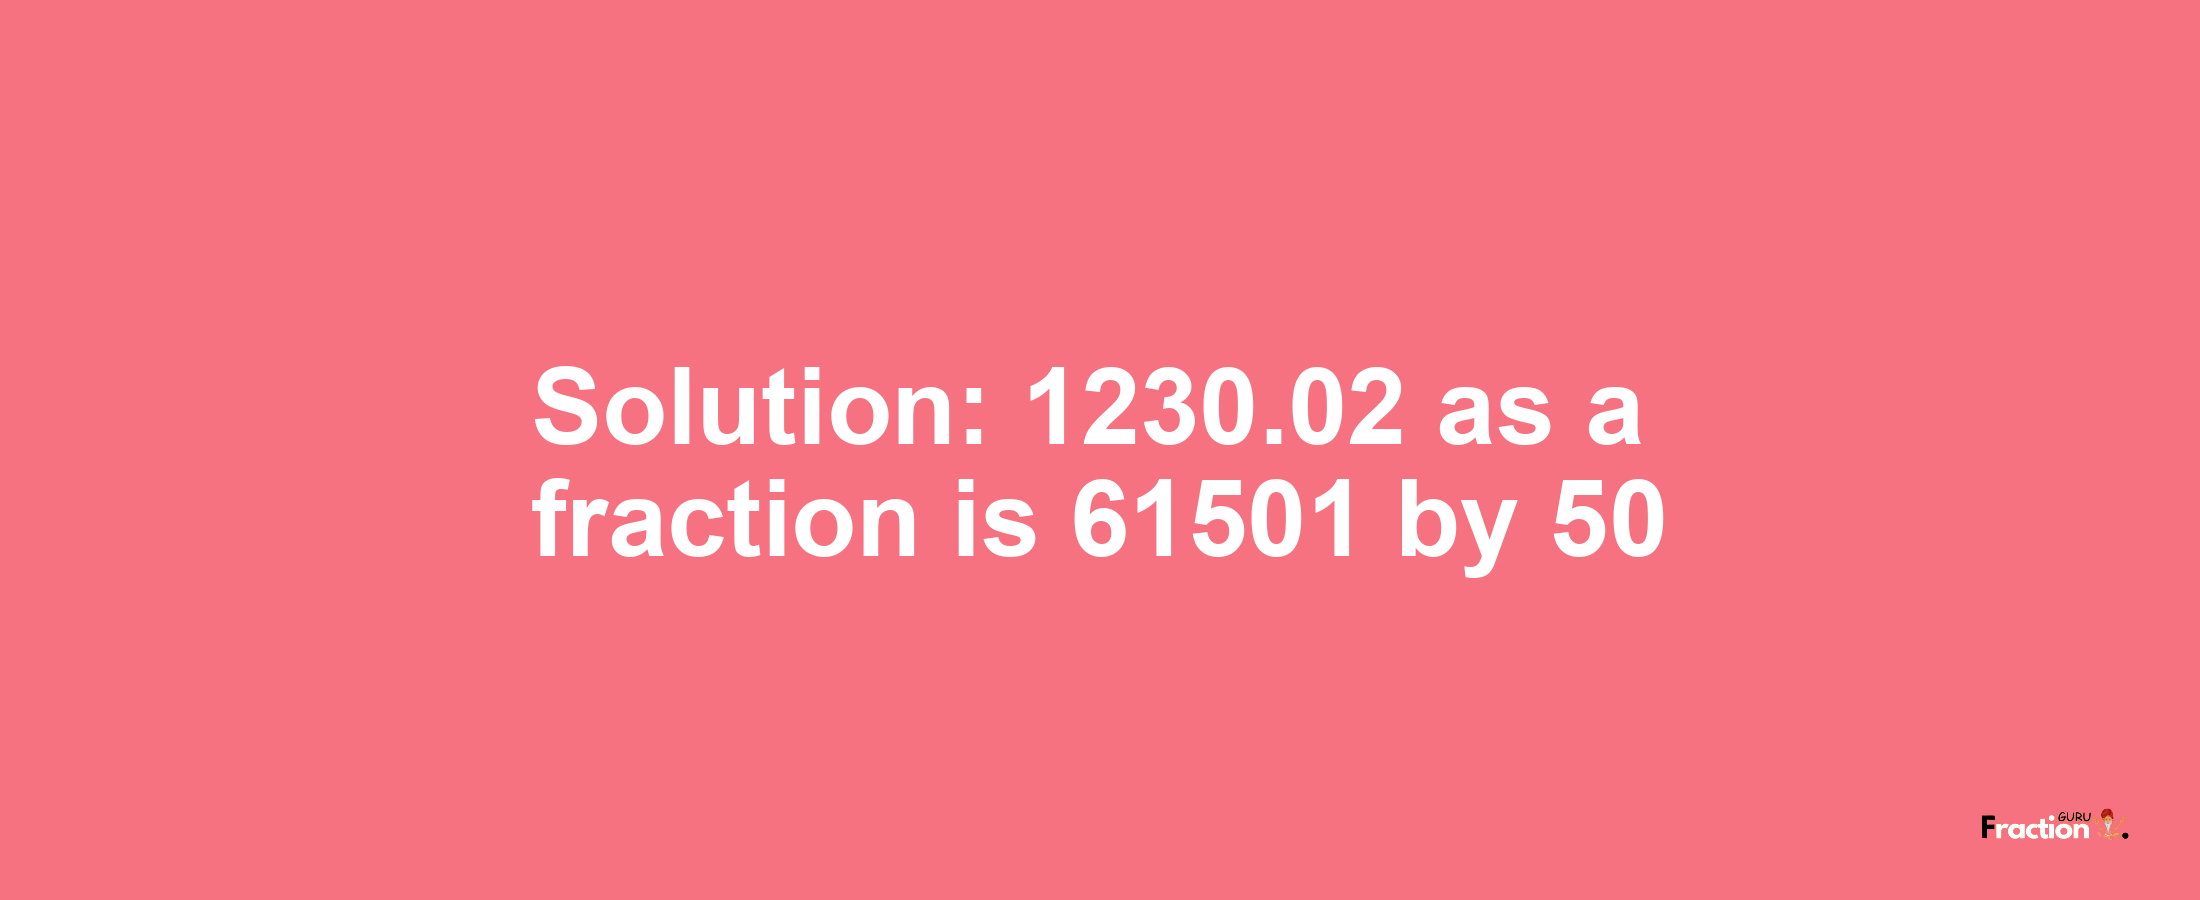 Solution:1230.02 as a fraction is 61501/50